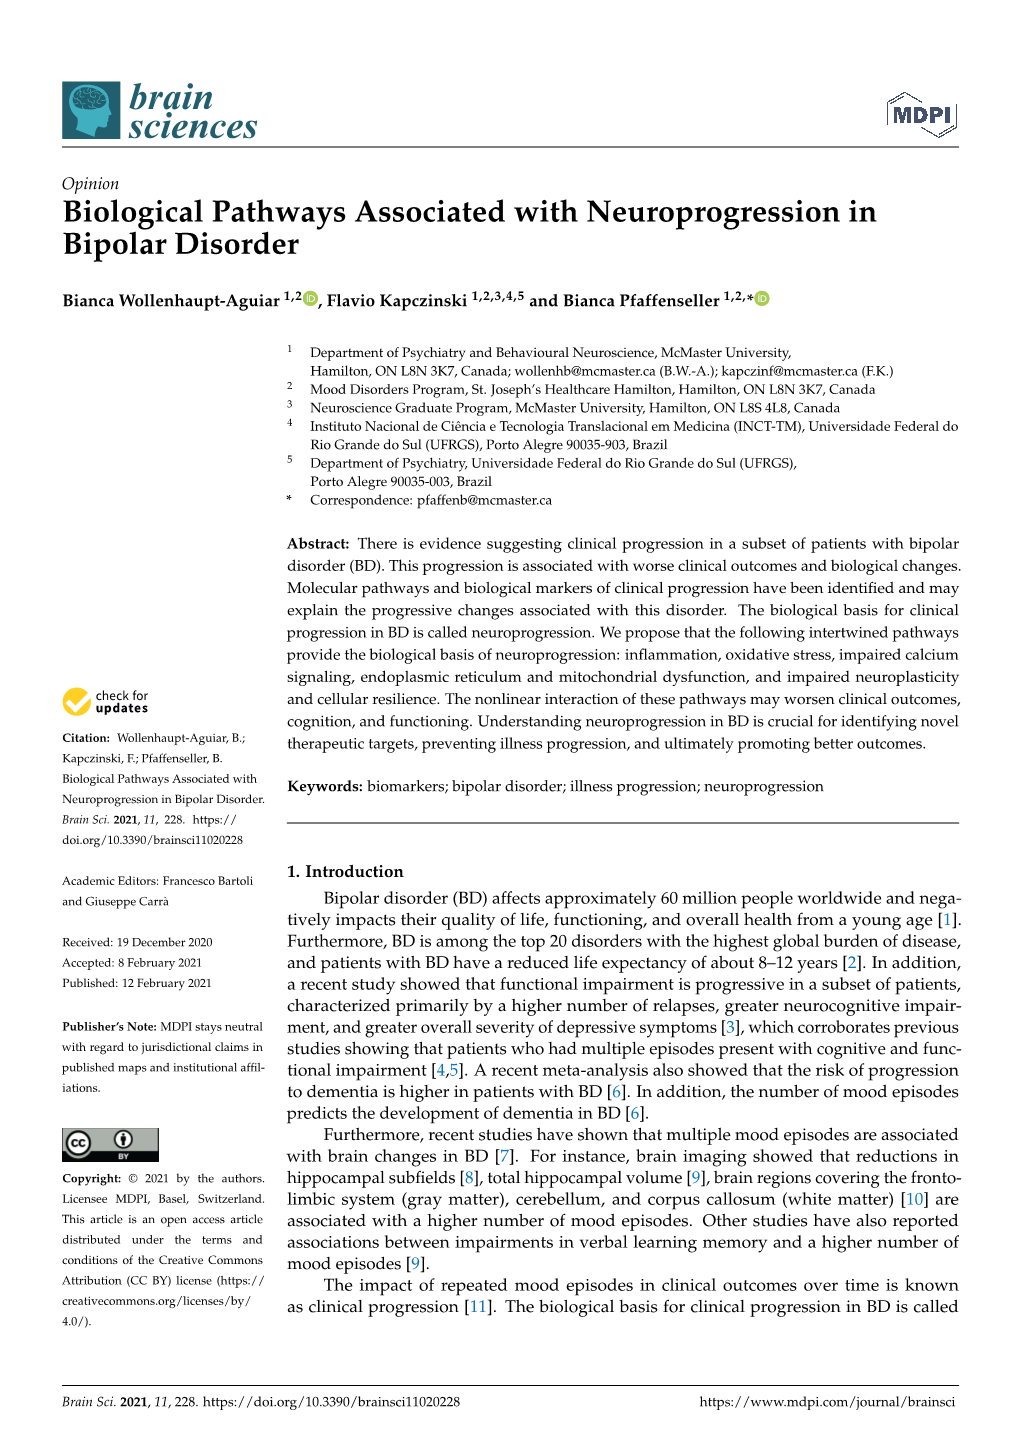 Biological Pathways Associated with Neuroprogression in Bipolar Disorder